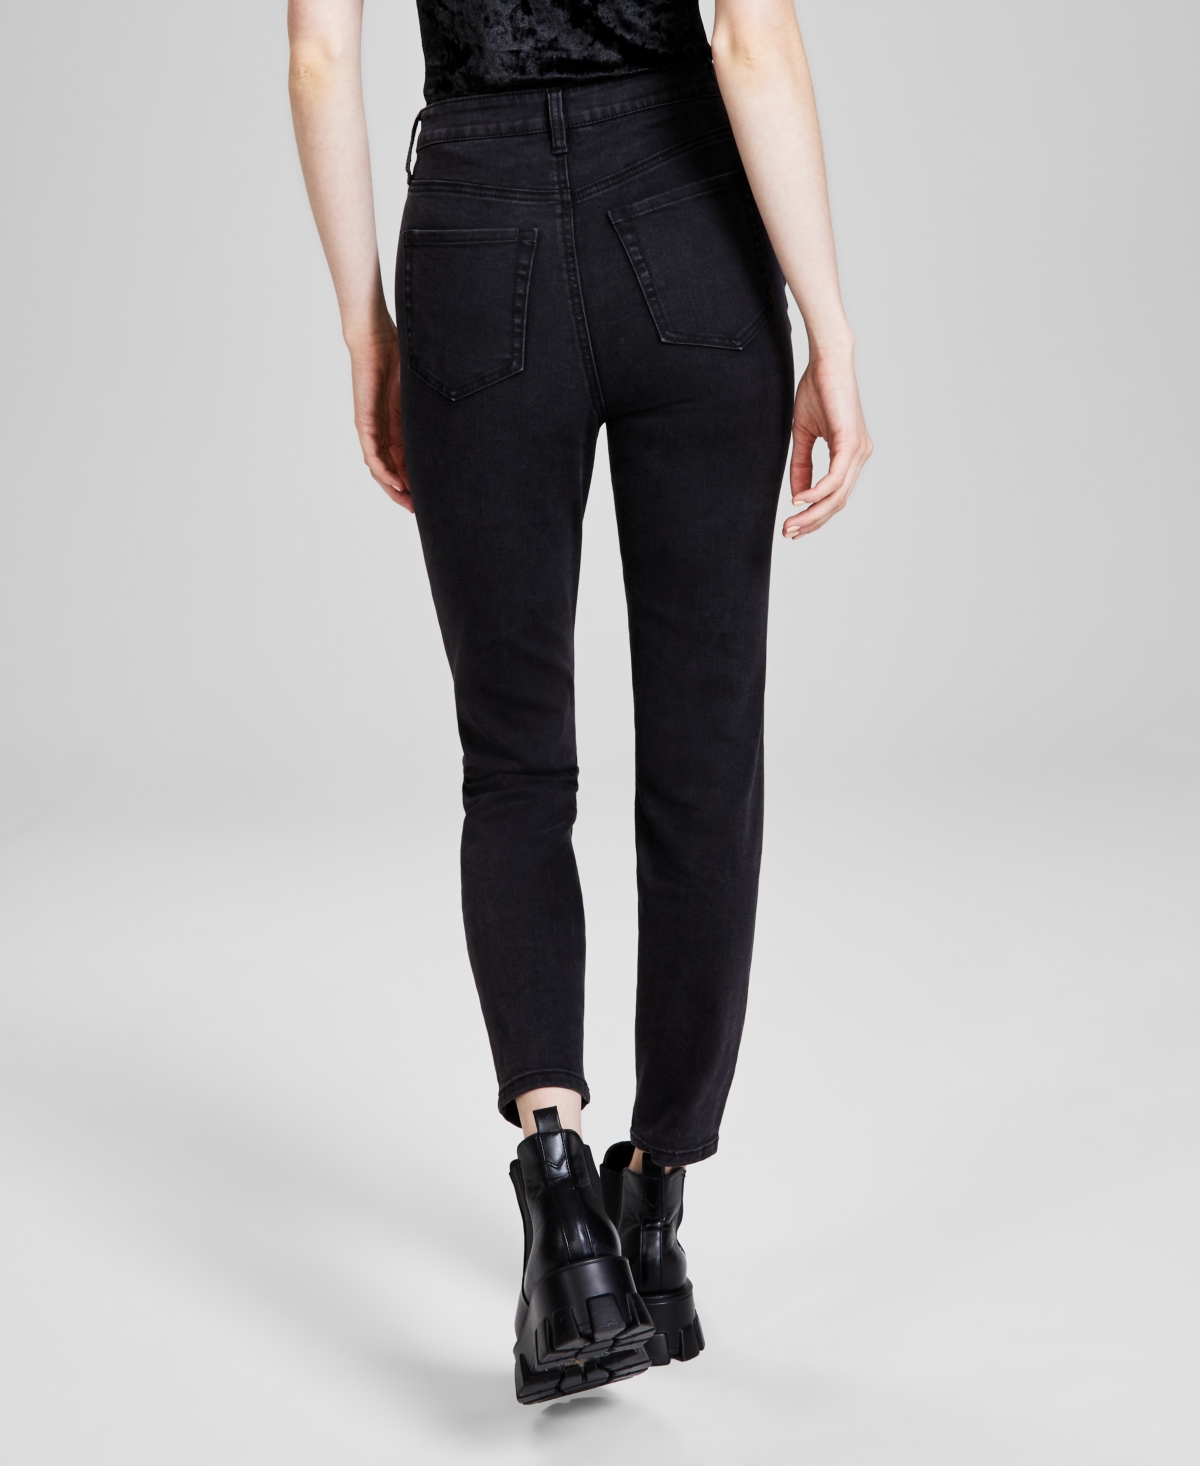 Shop And Now This Women's High Rise Skinny Jeans, Created For Macy's In Eddison